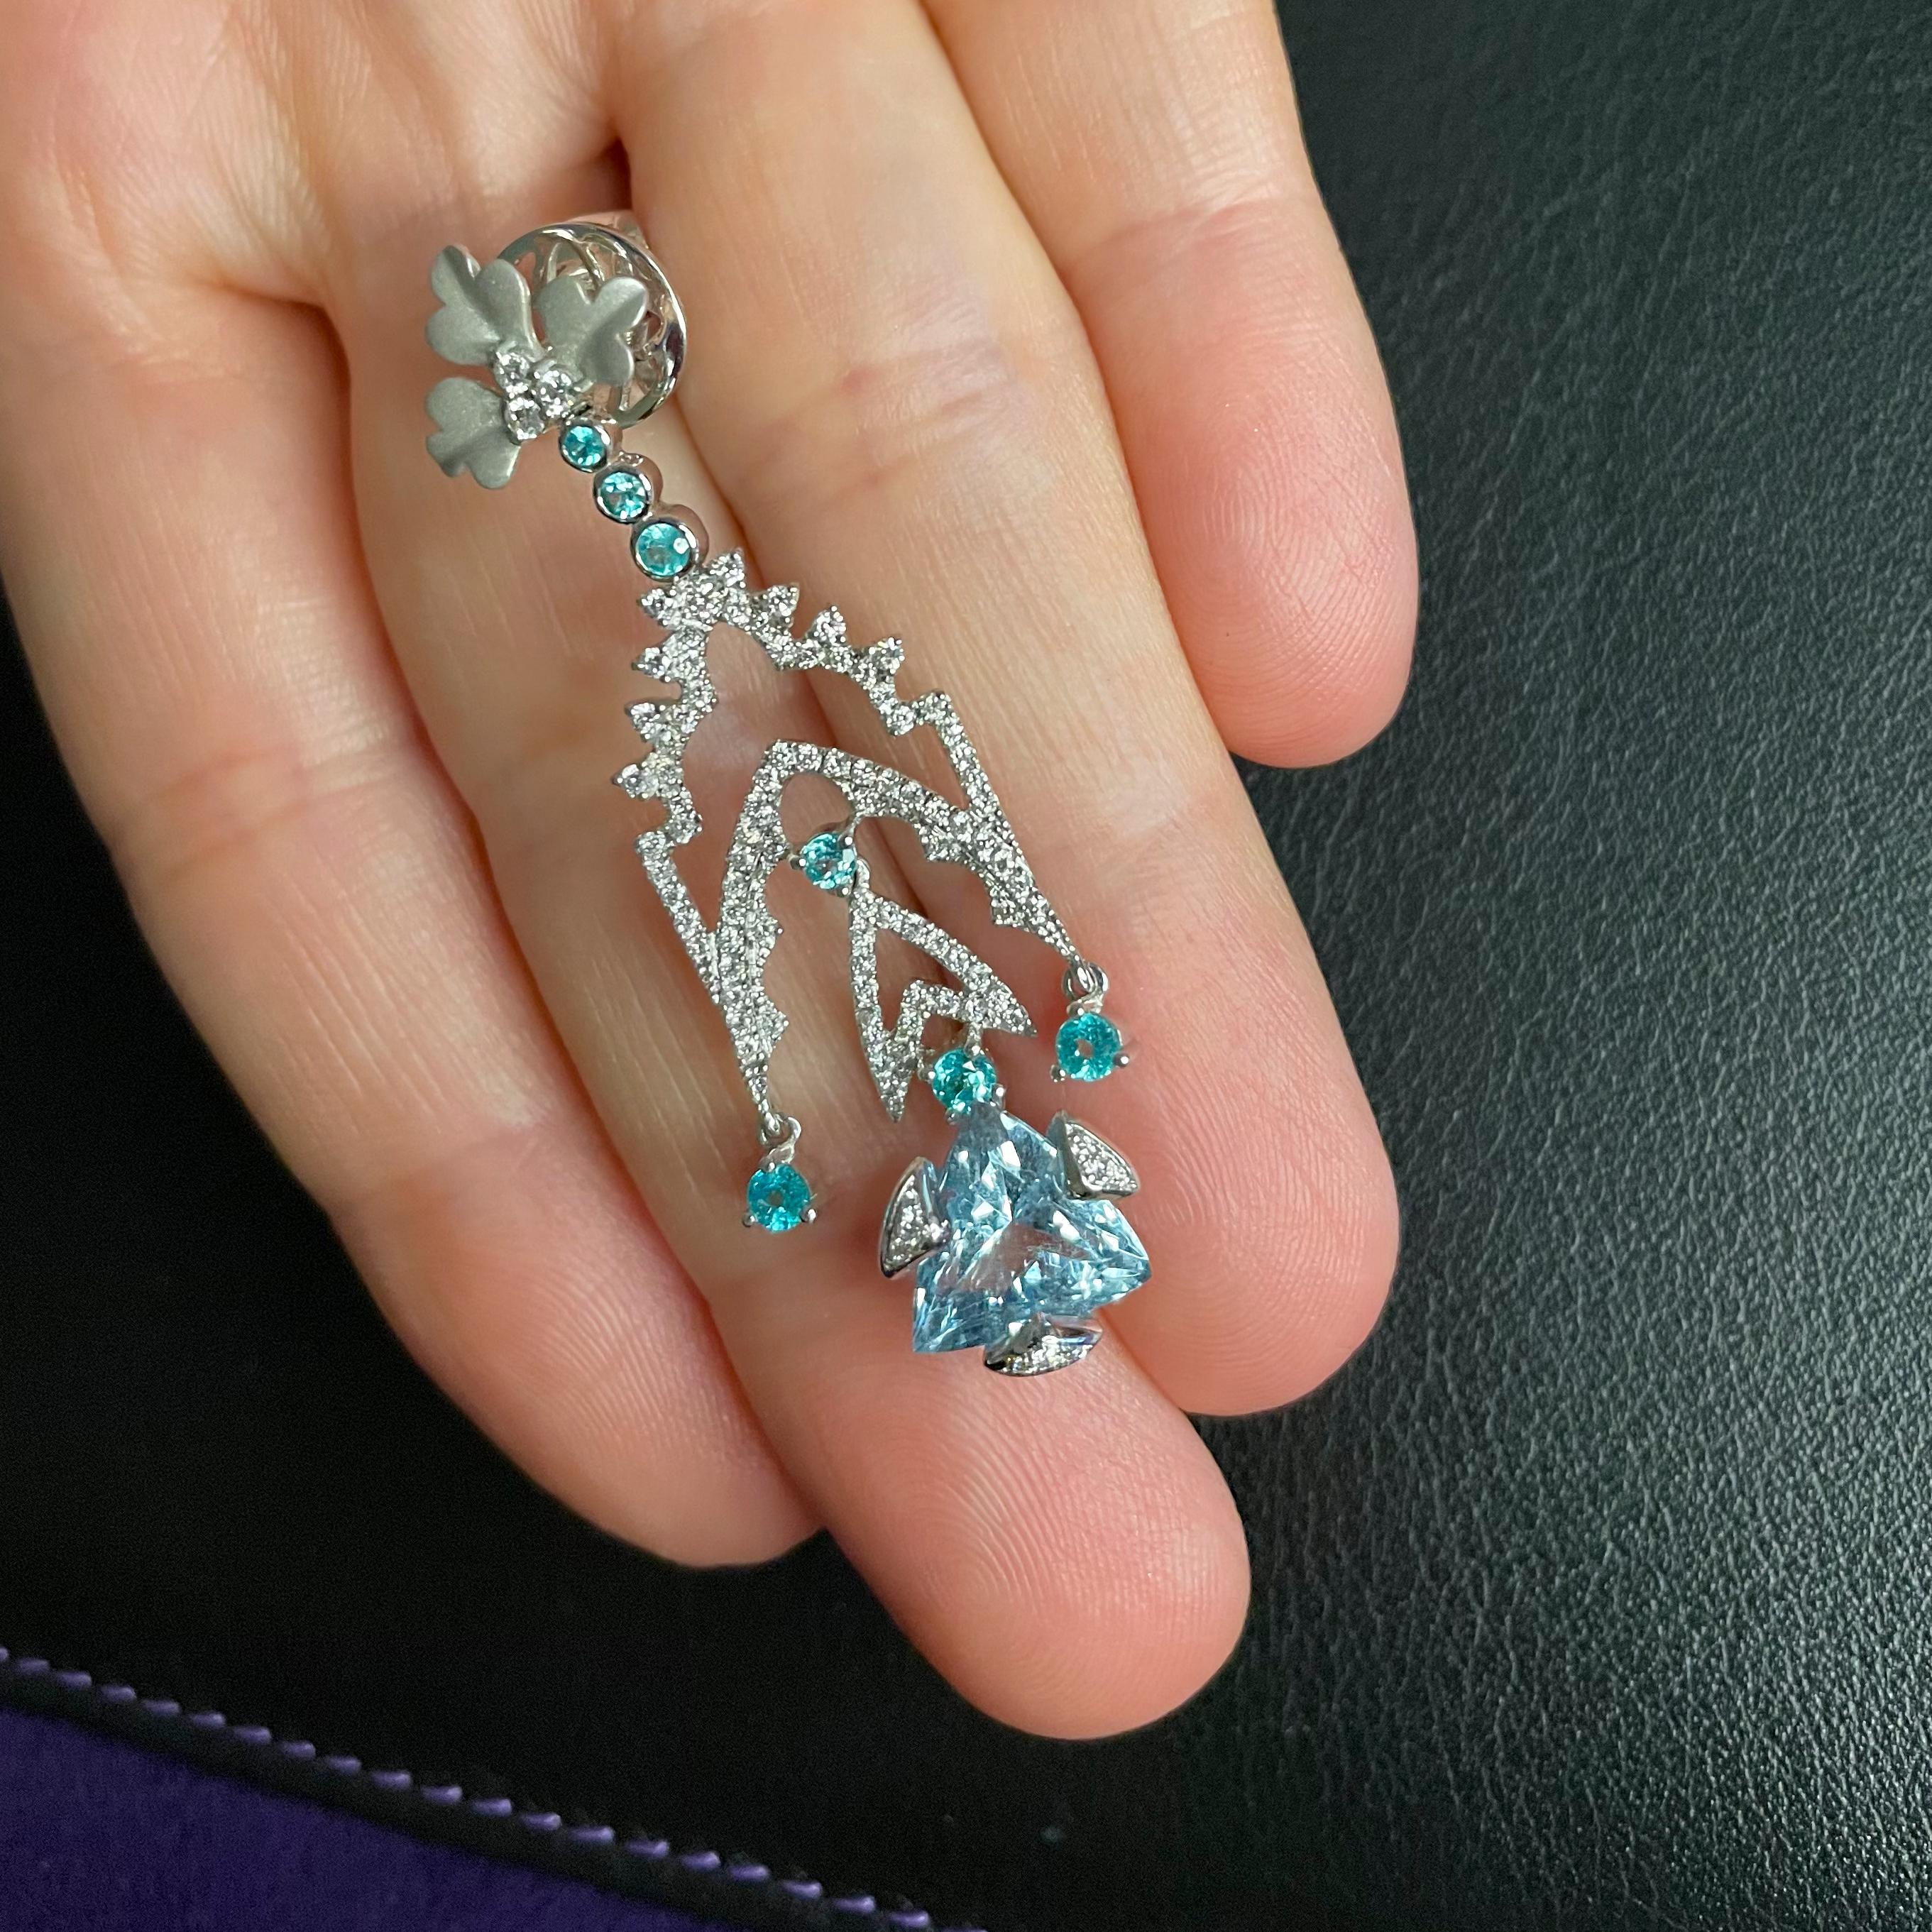 White Diamonds 0.964 cts - Paraiba 0.641 cts - Aquamarine Trillion 2 pcs 4.50 cts   

The pieces are unique creations engraved with Alessio Boschi's brand & logo, and a serial number which certifies their originality.